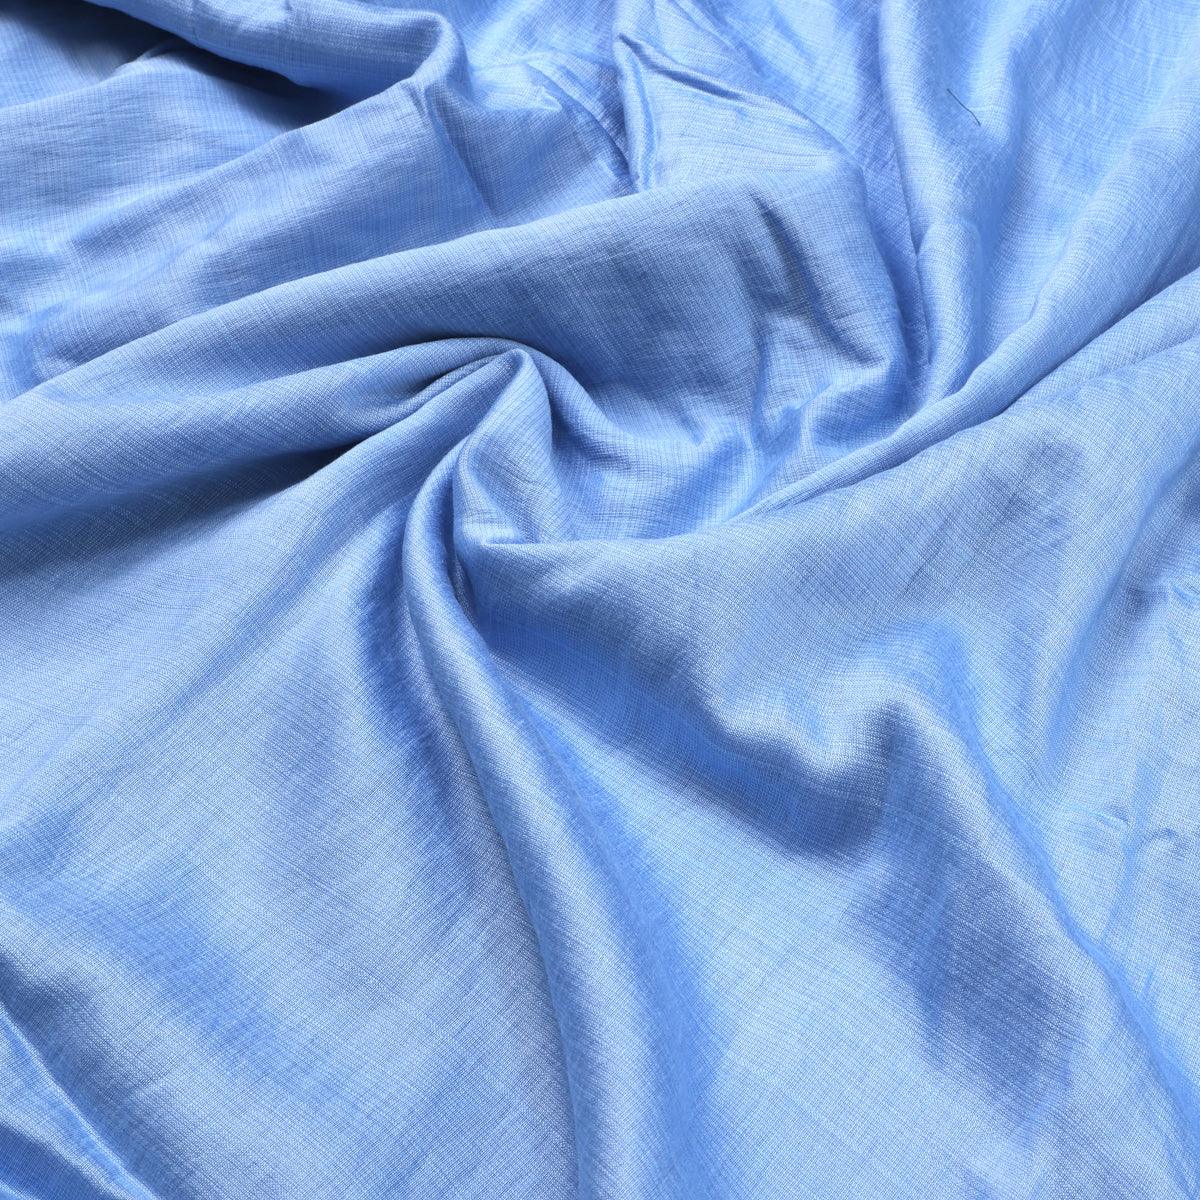 Sky Blue Colour Self Patterned Dyed Fabric - FAB VOGUE Studio®